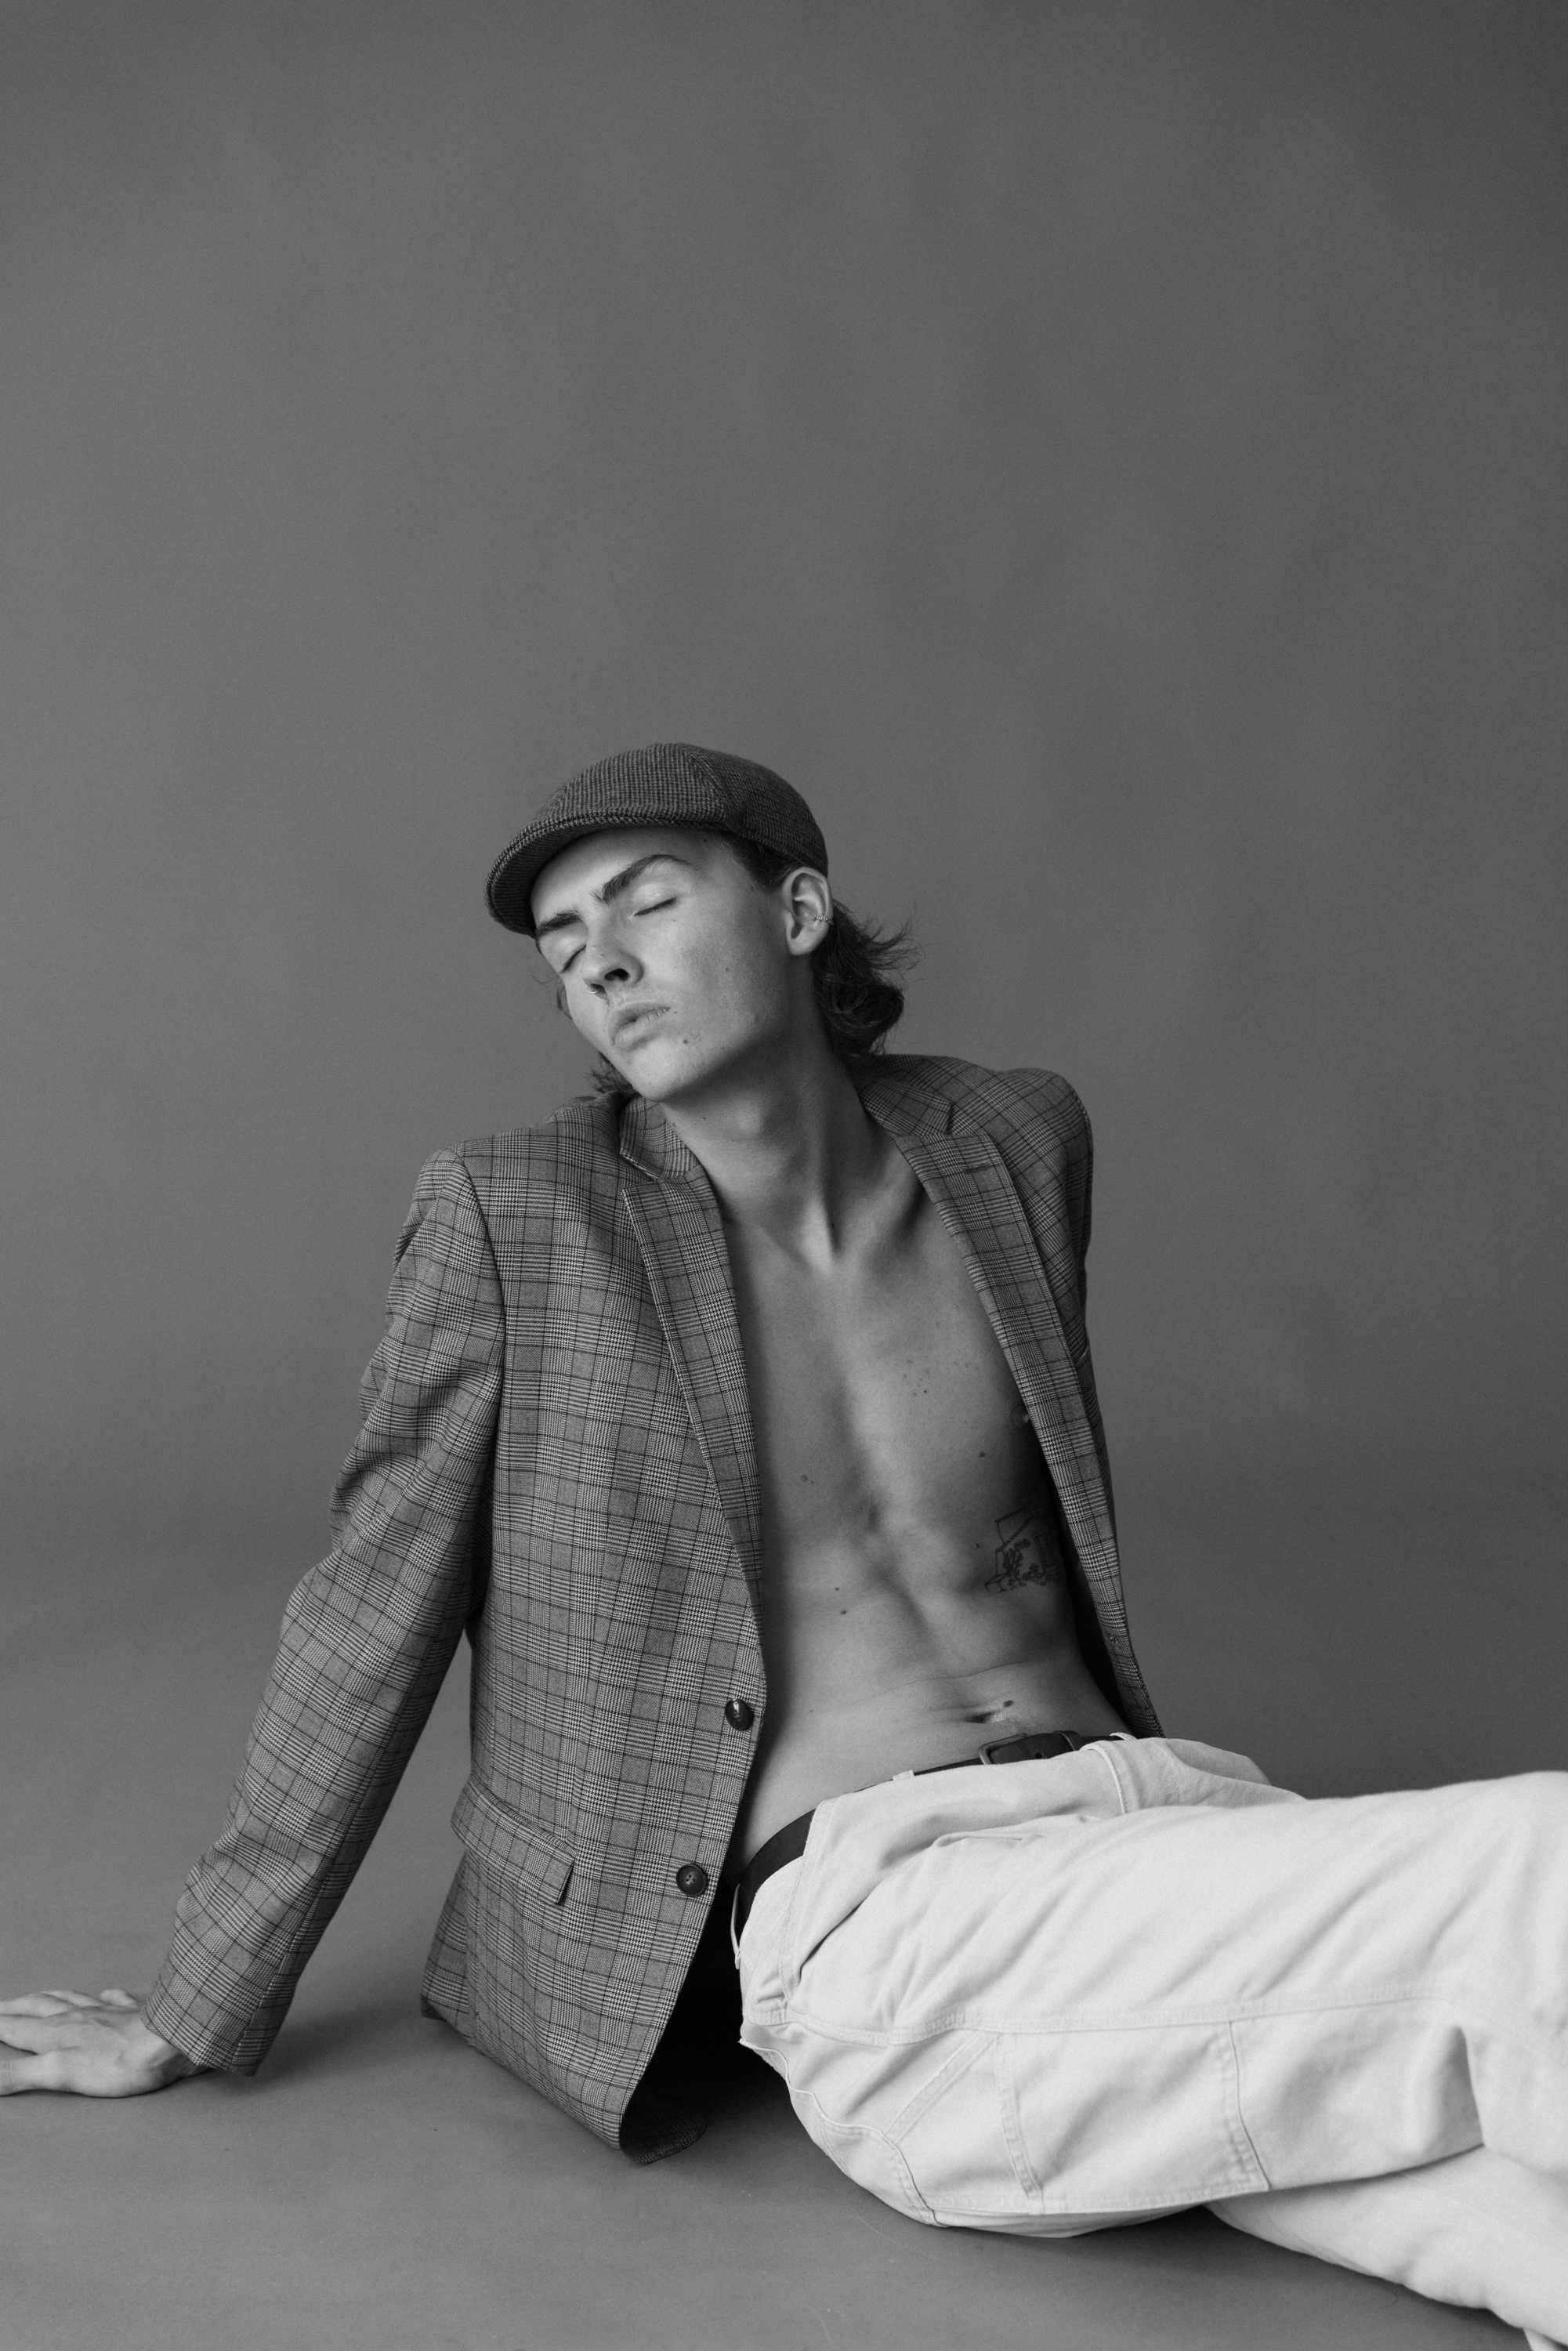 20-something shirtless man in a hat, lying on the floor with his jacket over him